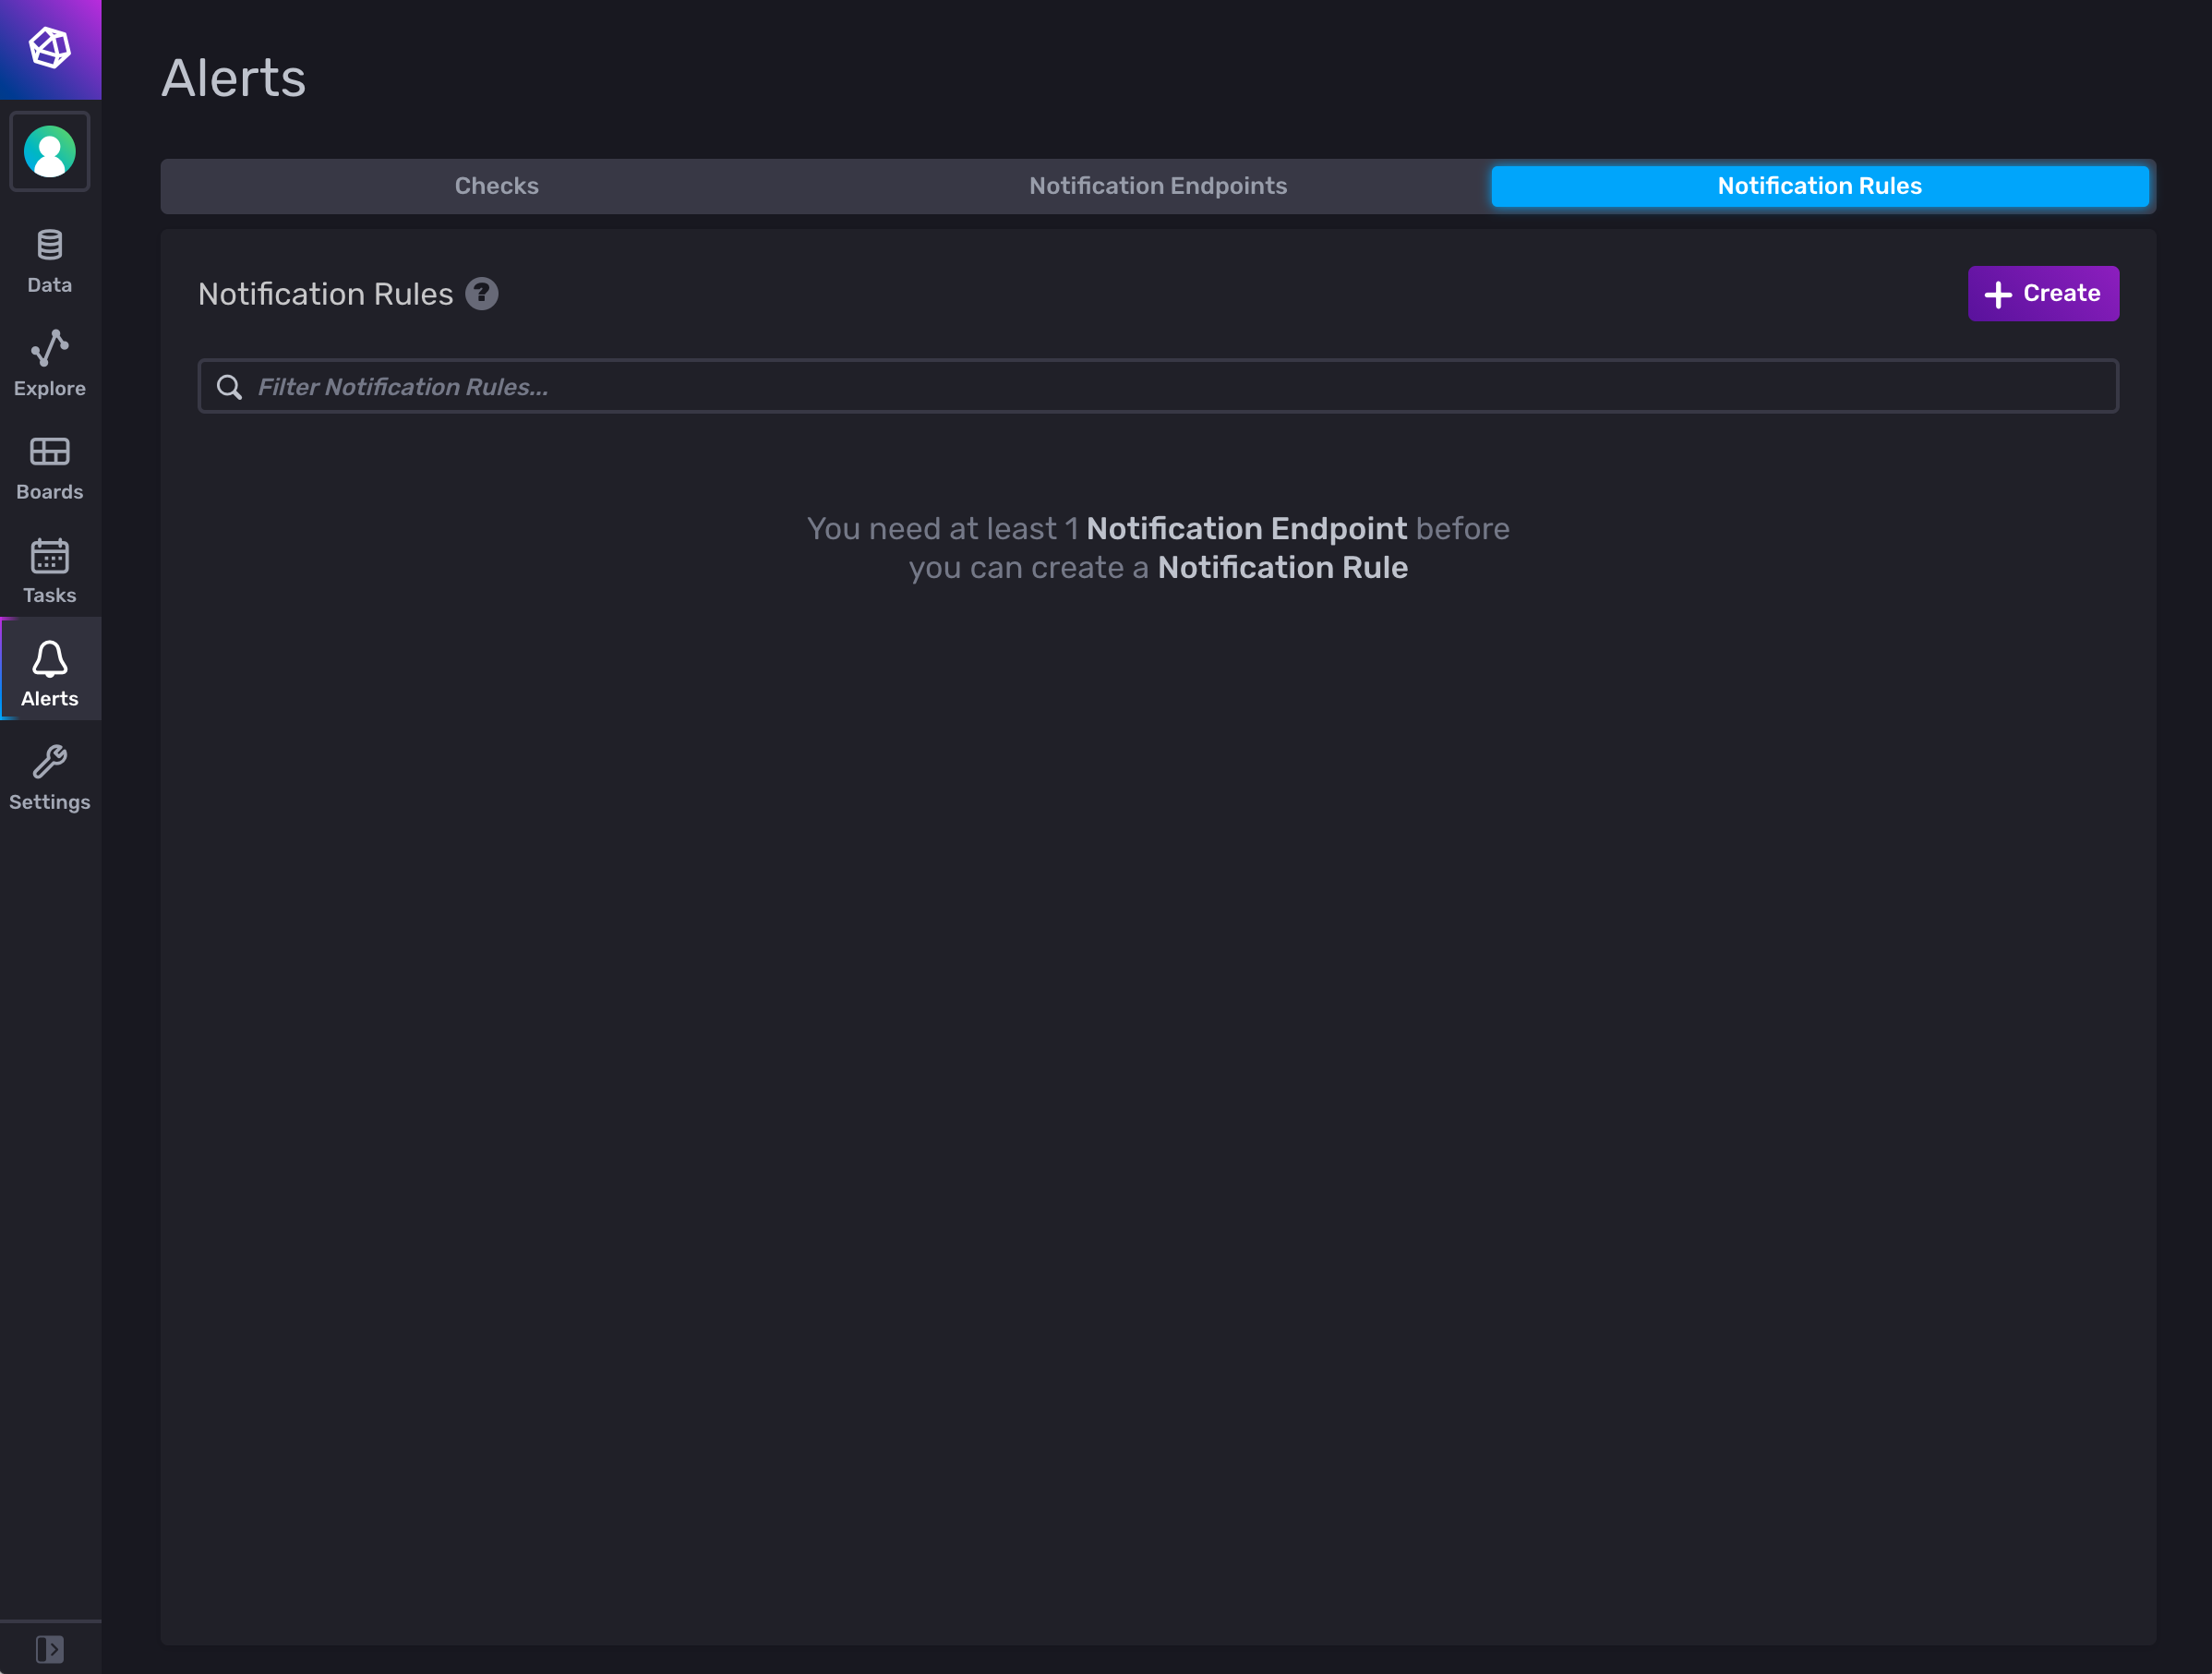 InfluxDB Alerts page, Notification Rules tab